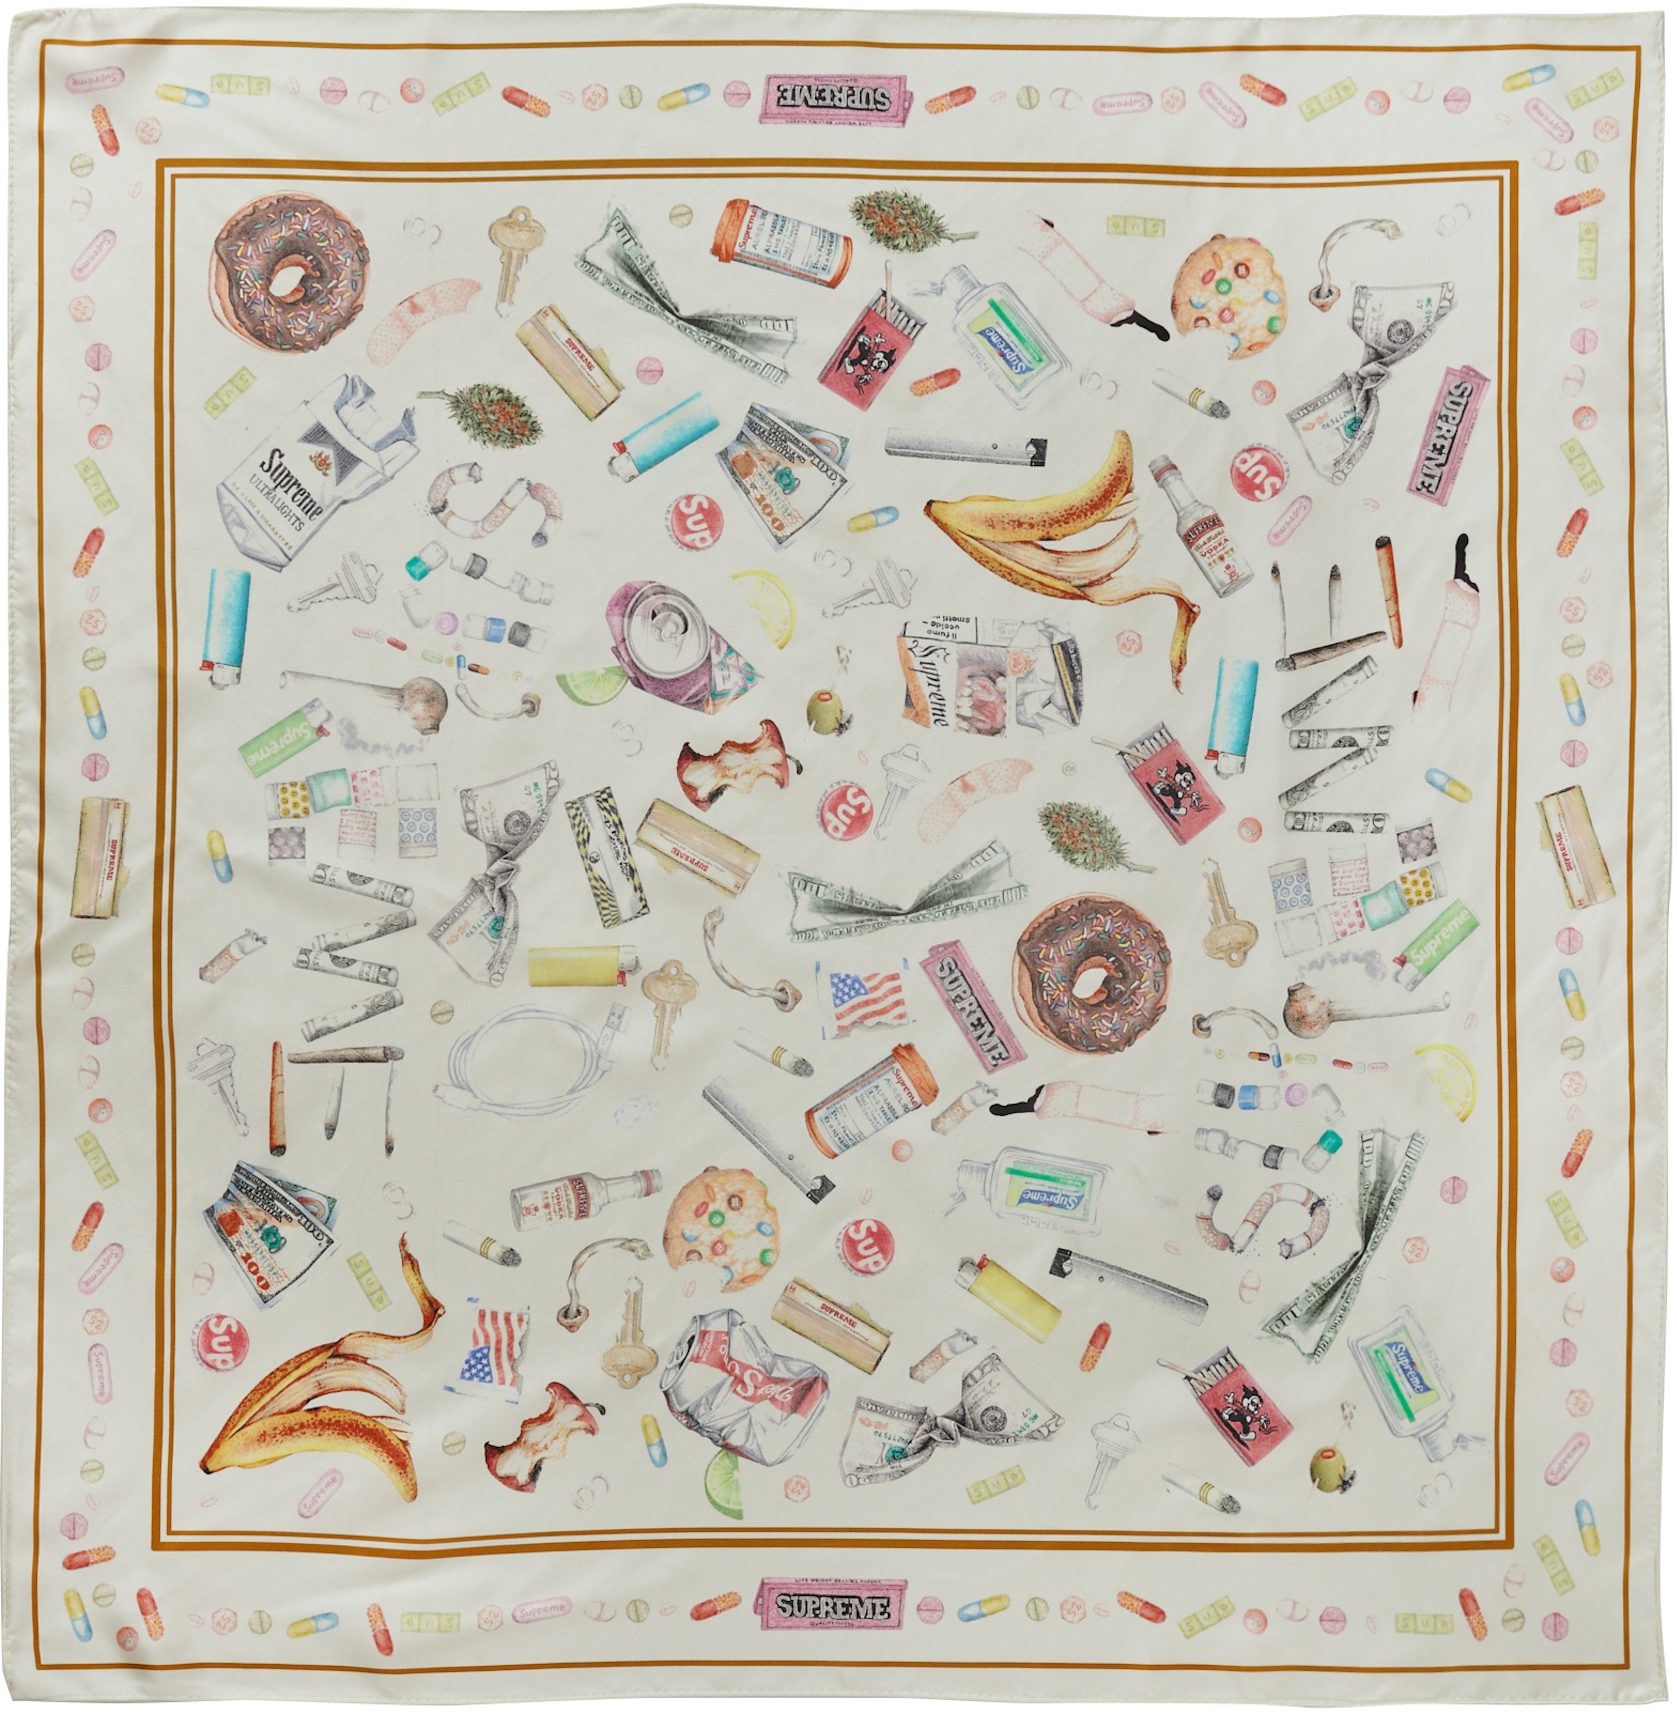 Louis Vuitton Multi-colored Cities Printed Silk Scarf